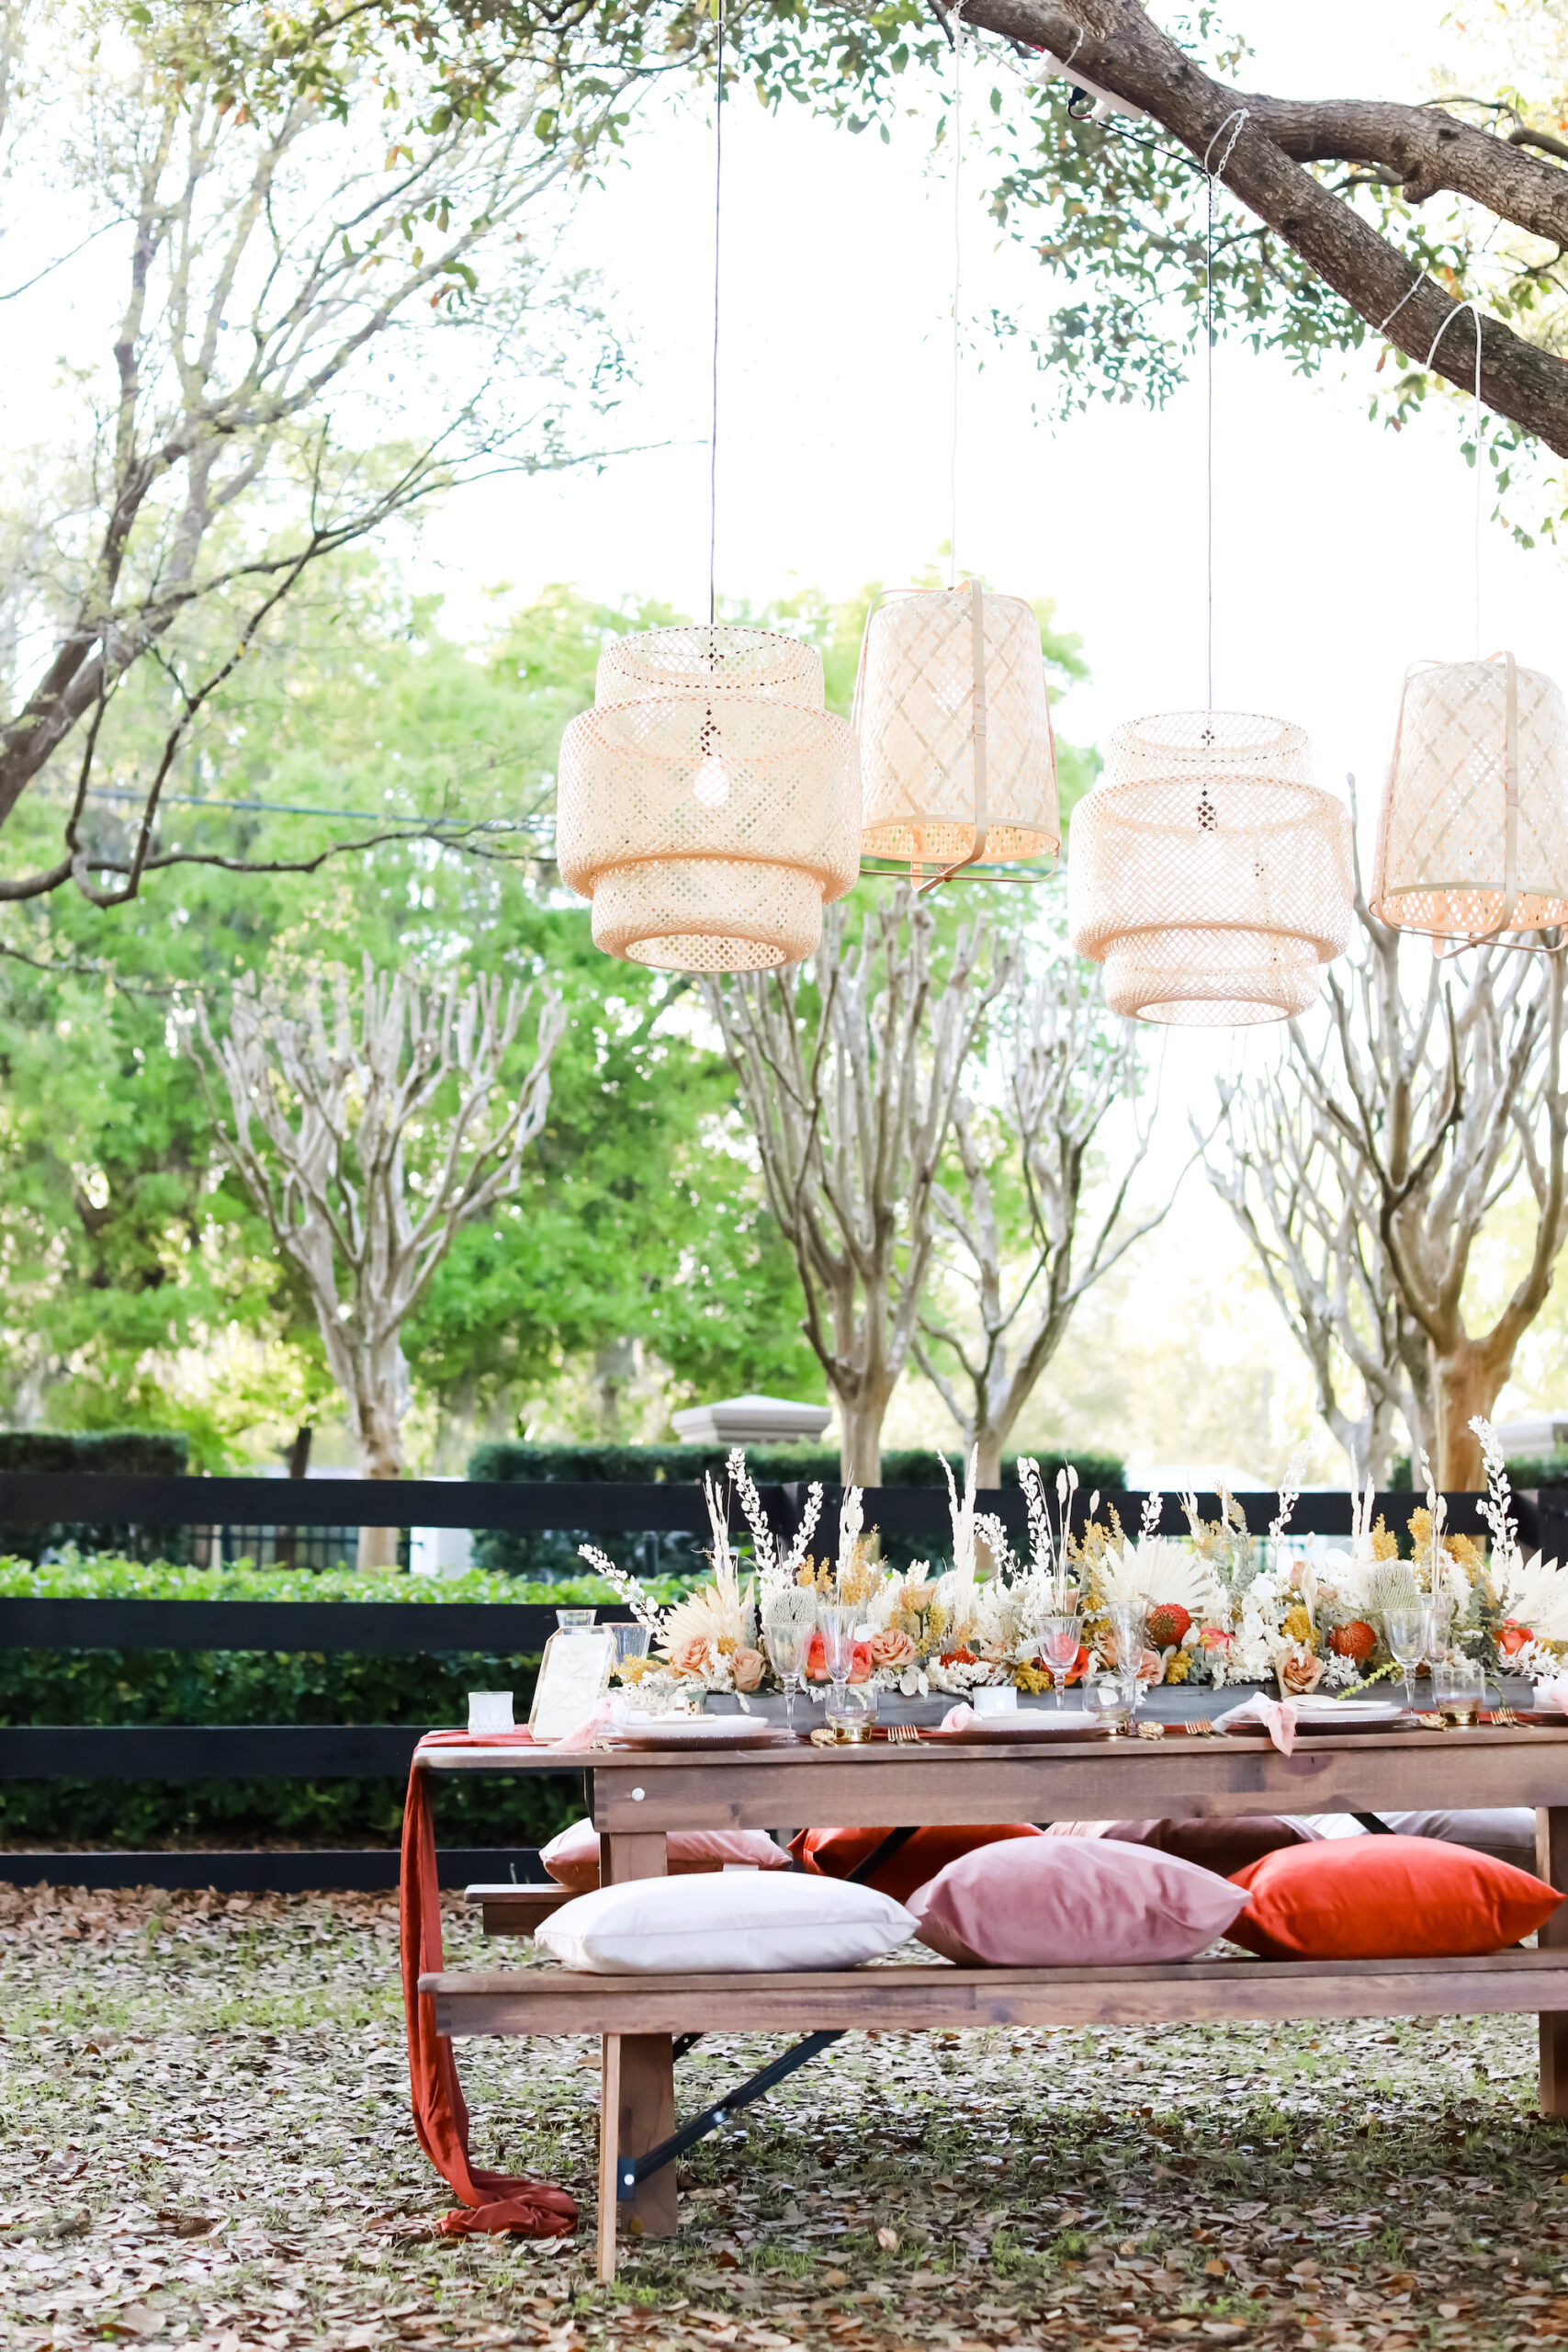 Boho Styled Wicker Lanterns Outdoor Wedding Decor Inspiration Boho Picnic with and Fall Reception Tablescape with Wooden Farm Table and Benches with Pillow Centerpiece Inspiration | Tampa Bay Rentals Gabro Event Services